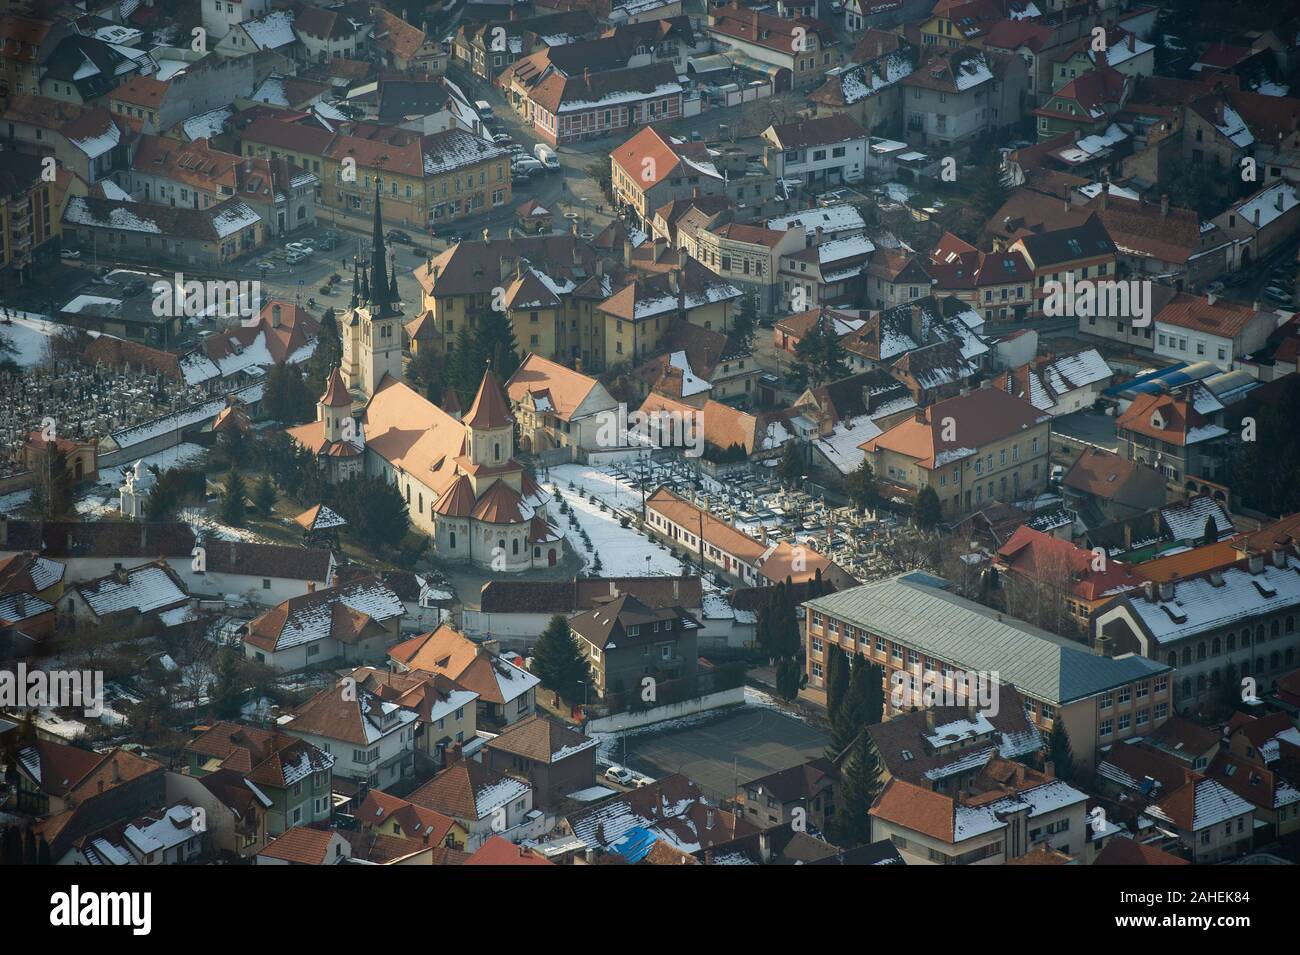 The well preserved buildings in the Transylvanian town of Brasov, Romania, make it a popular tourist destination. Stock Photo